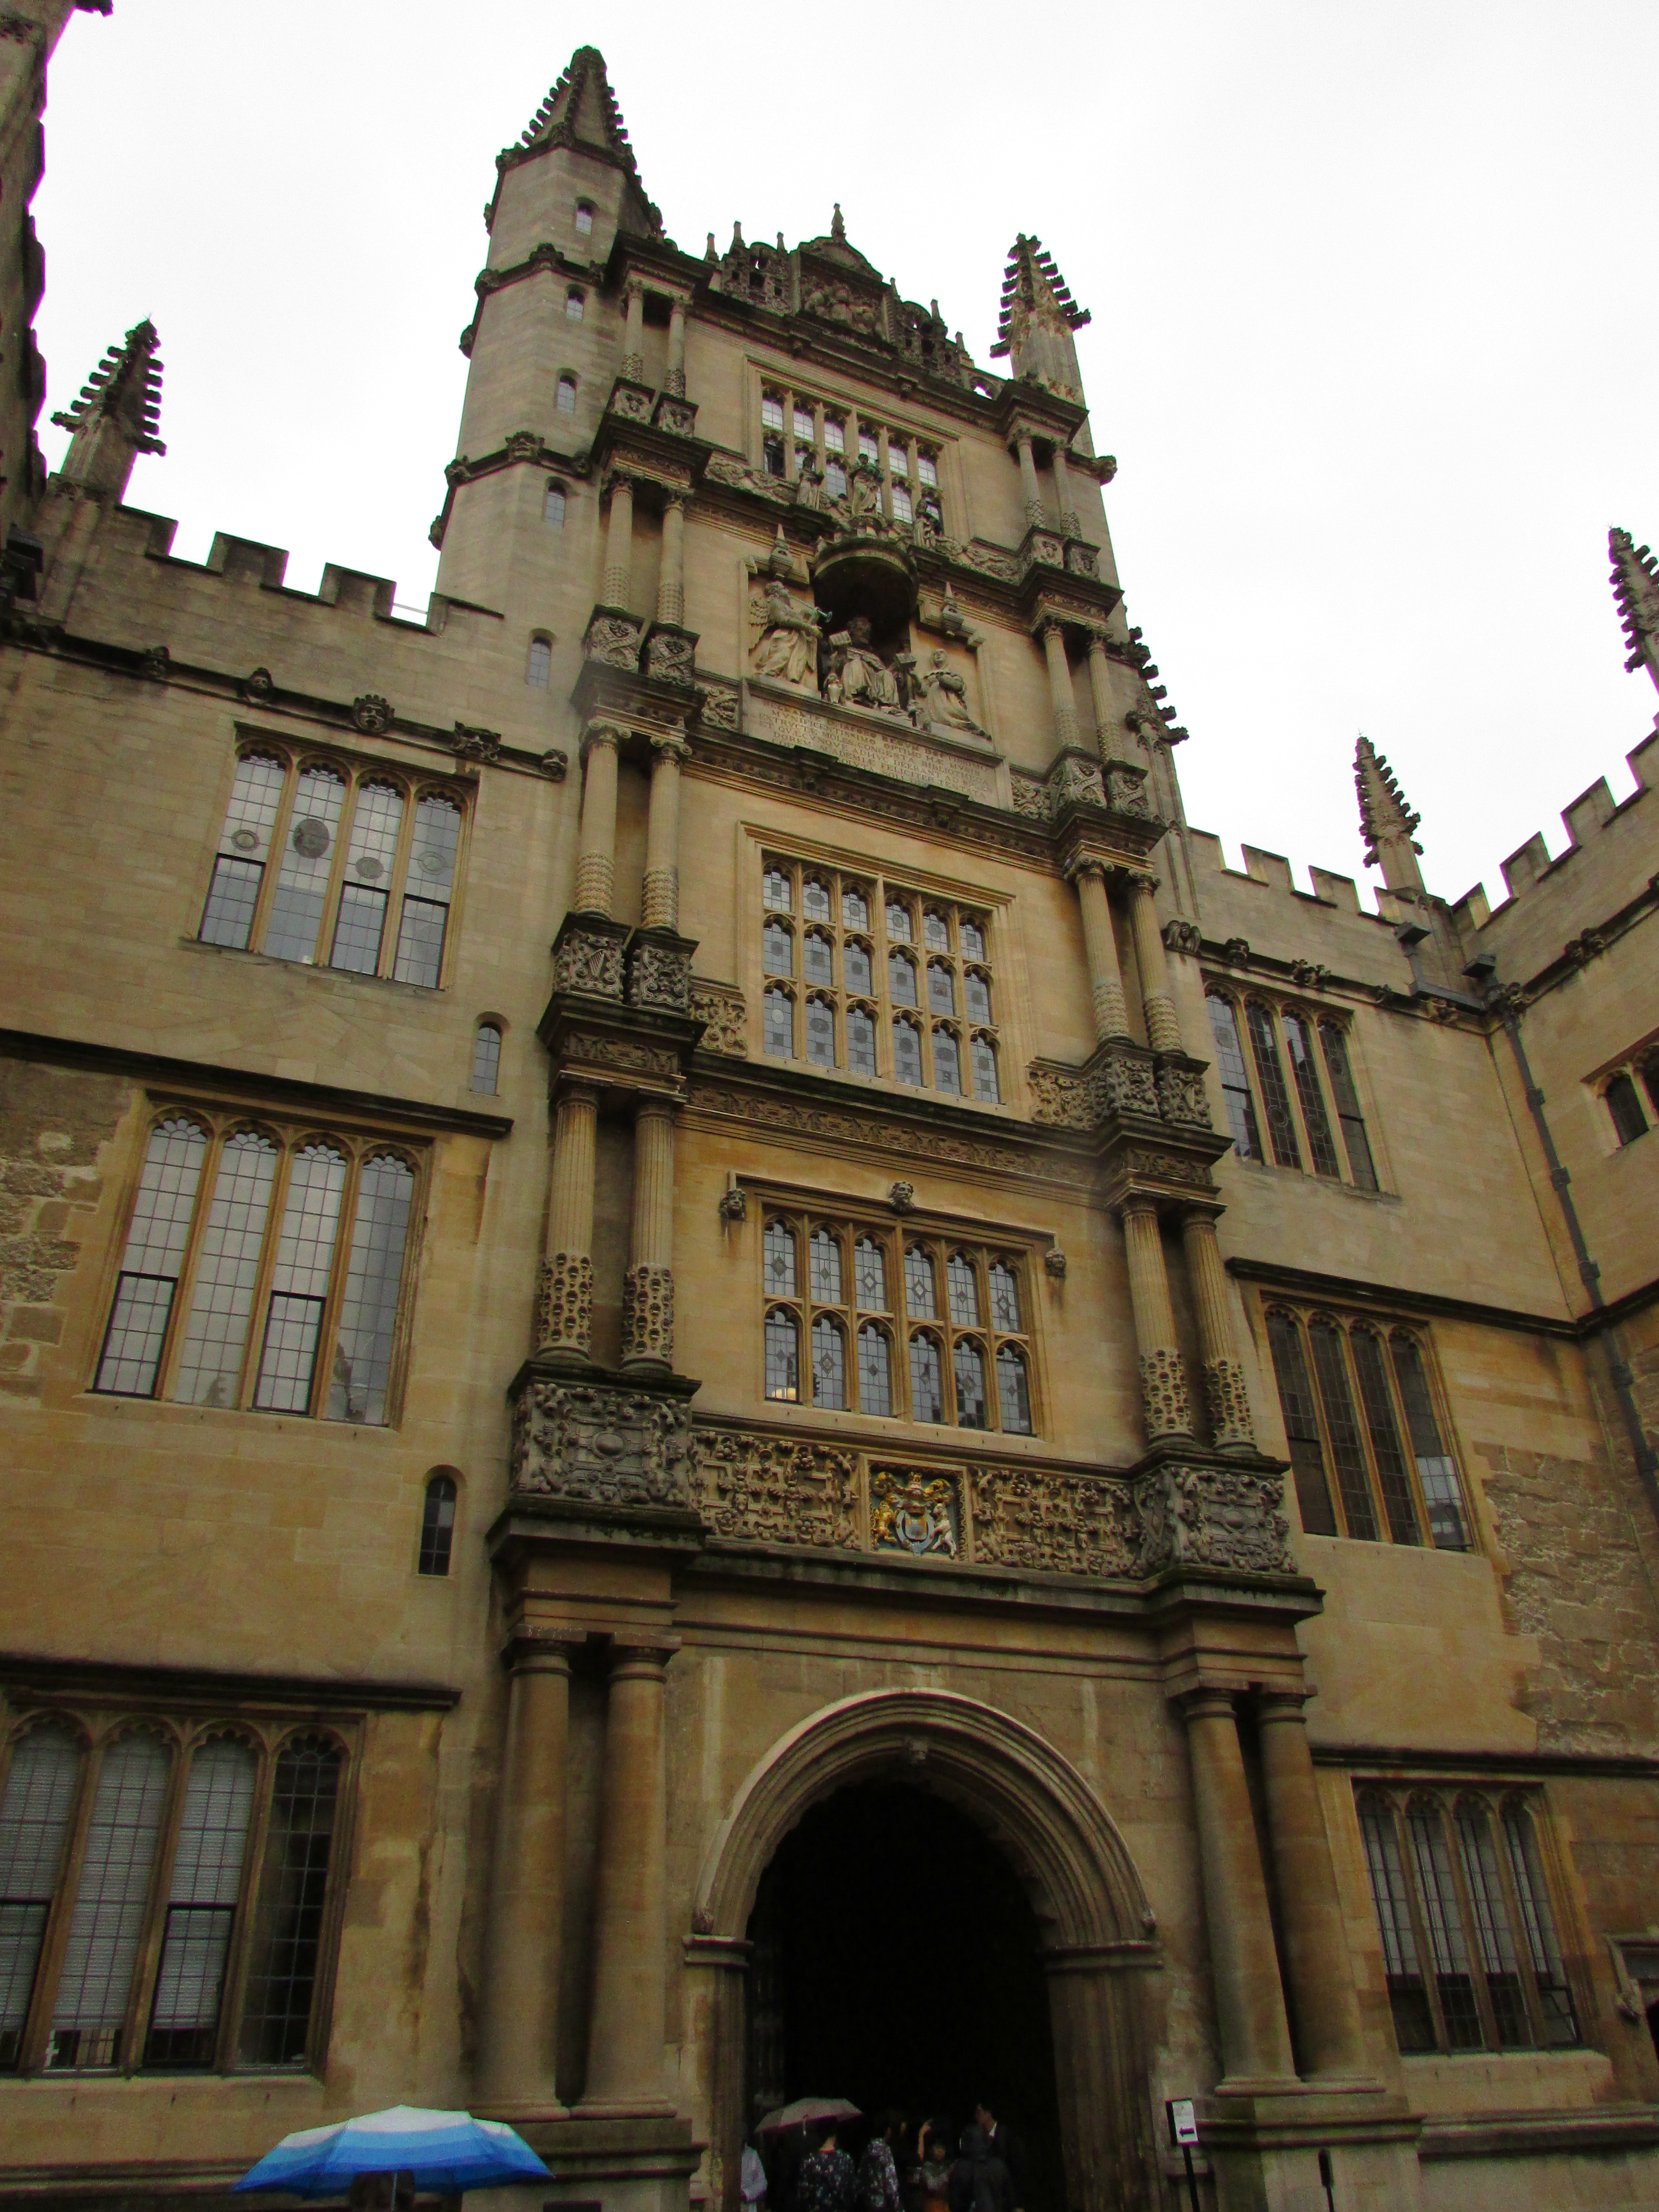 A Day At Oxford  The Magic of London